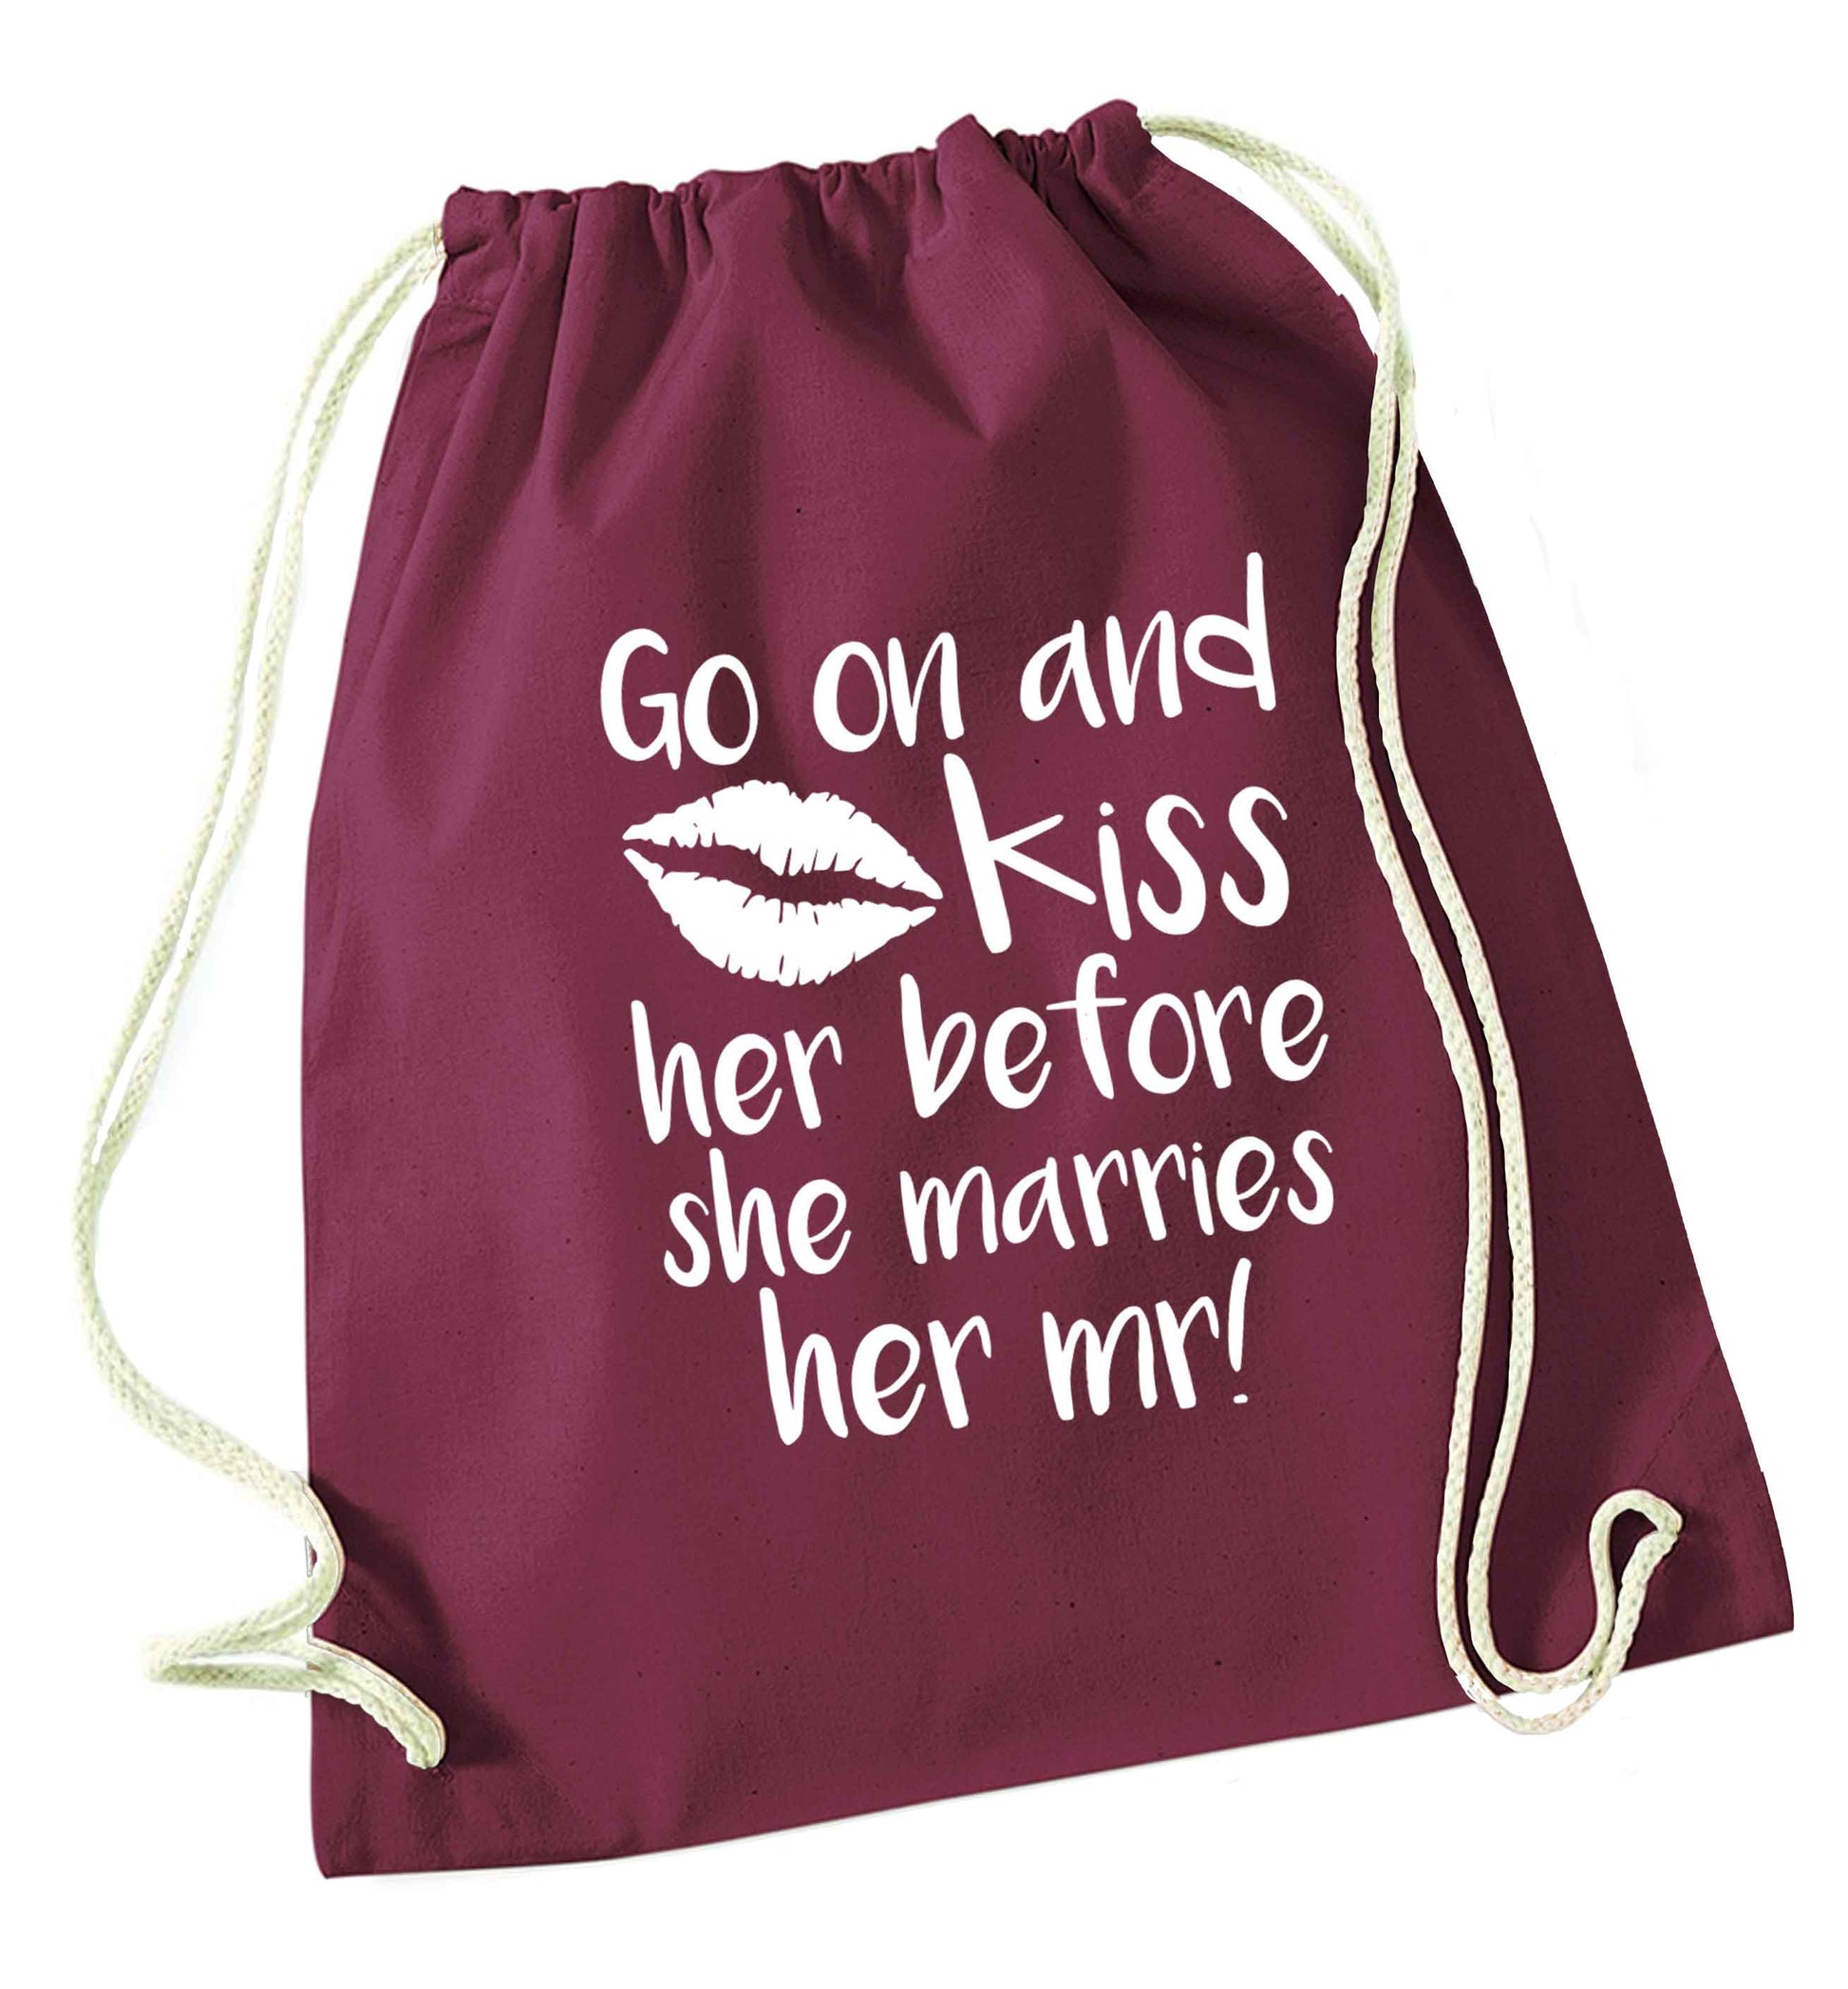 Kiss her before she marries her mr! maroon drawstring bag